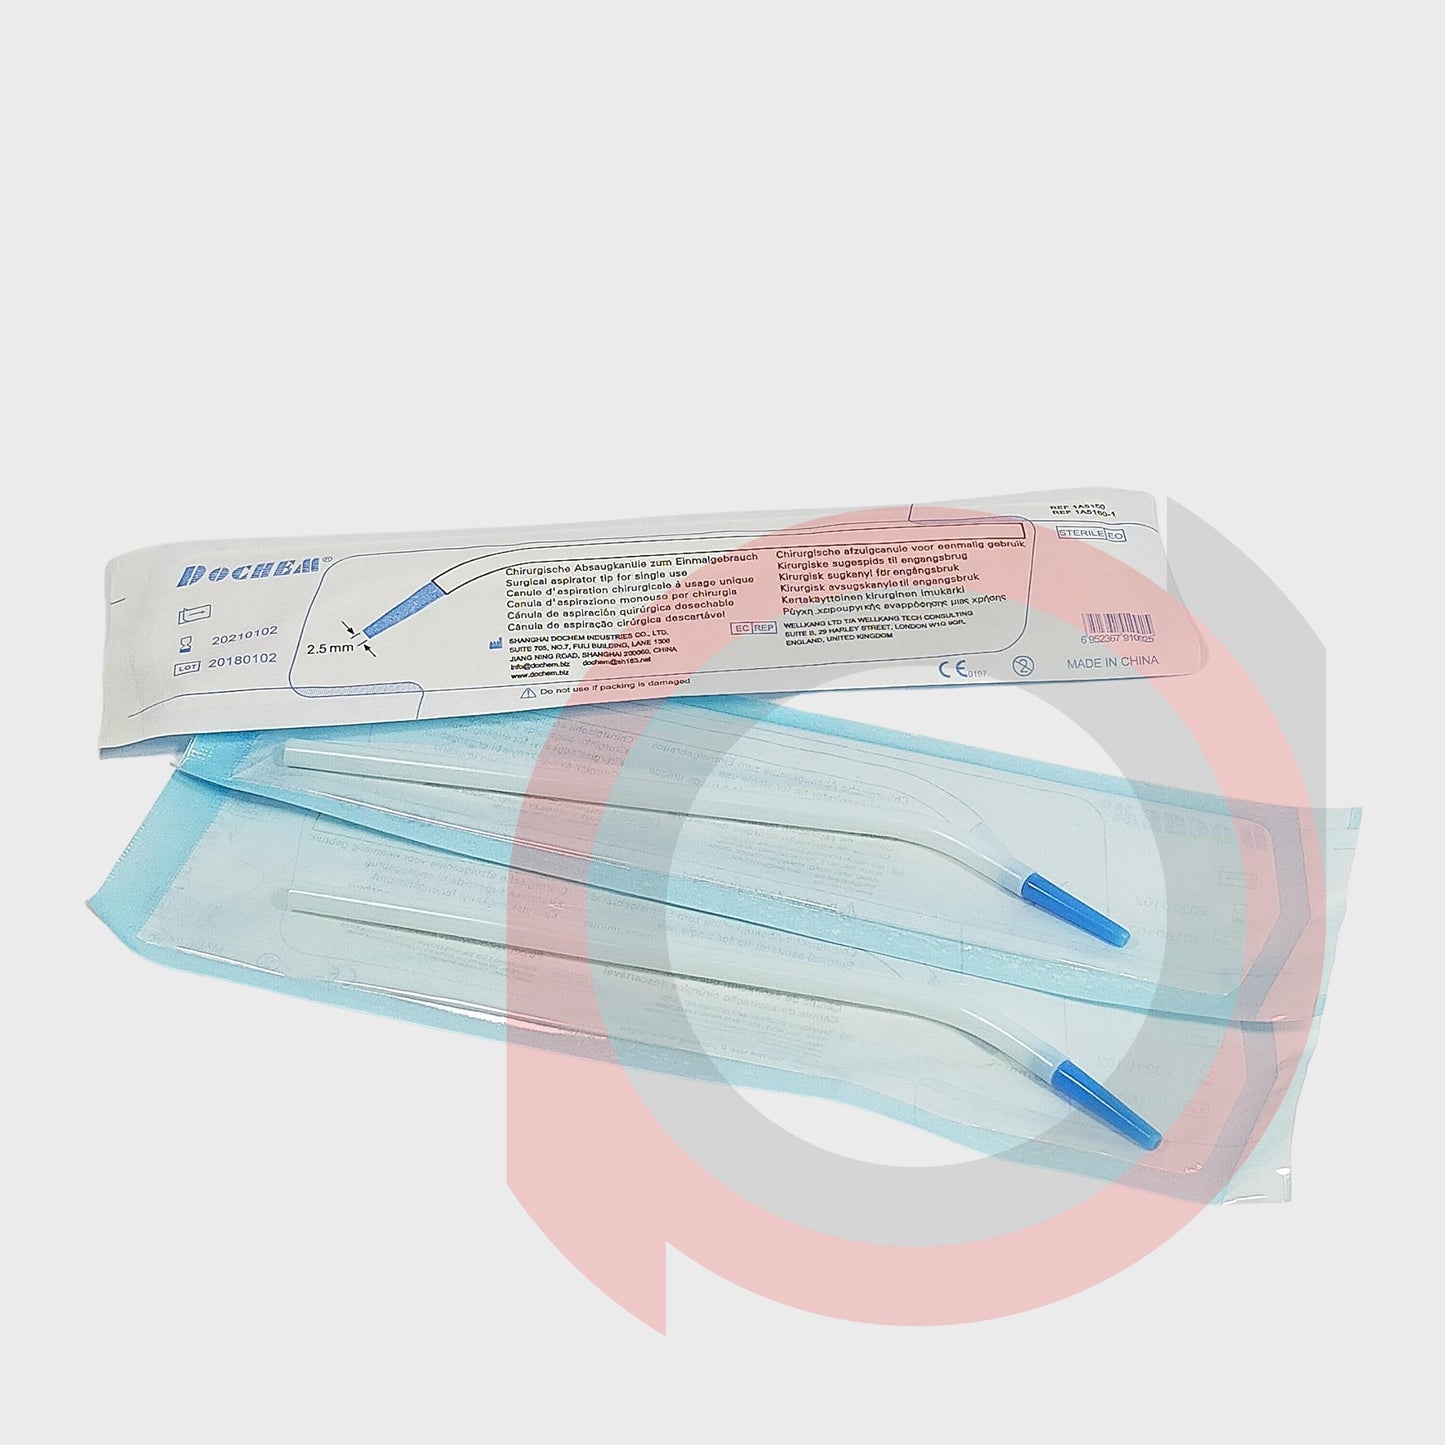 Suction Tip - Surgical Sterile